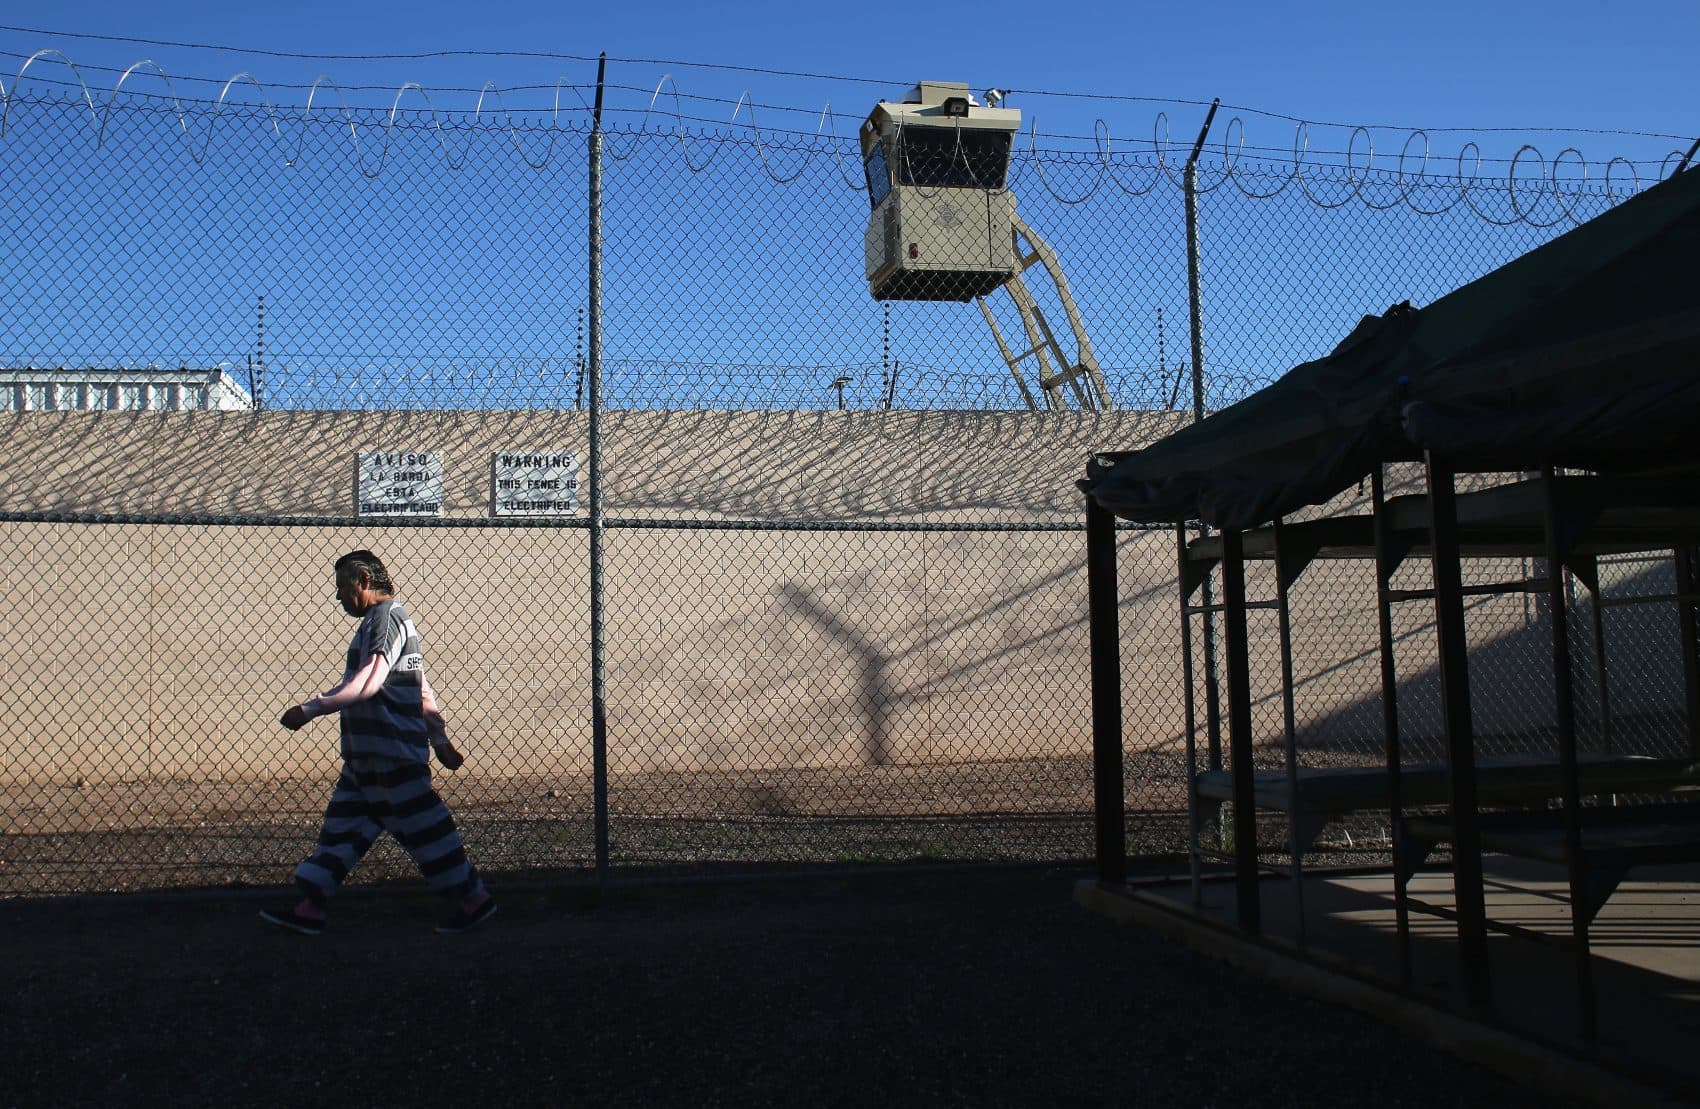 An immigrant inmate walks for exercise at the Maricopa County Tent City jail on March 11, 2013, in Phoenix. (John Moore/Getty Images)